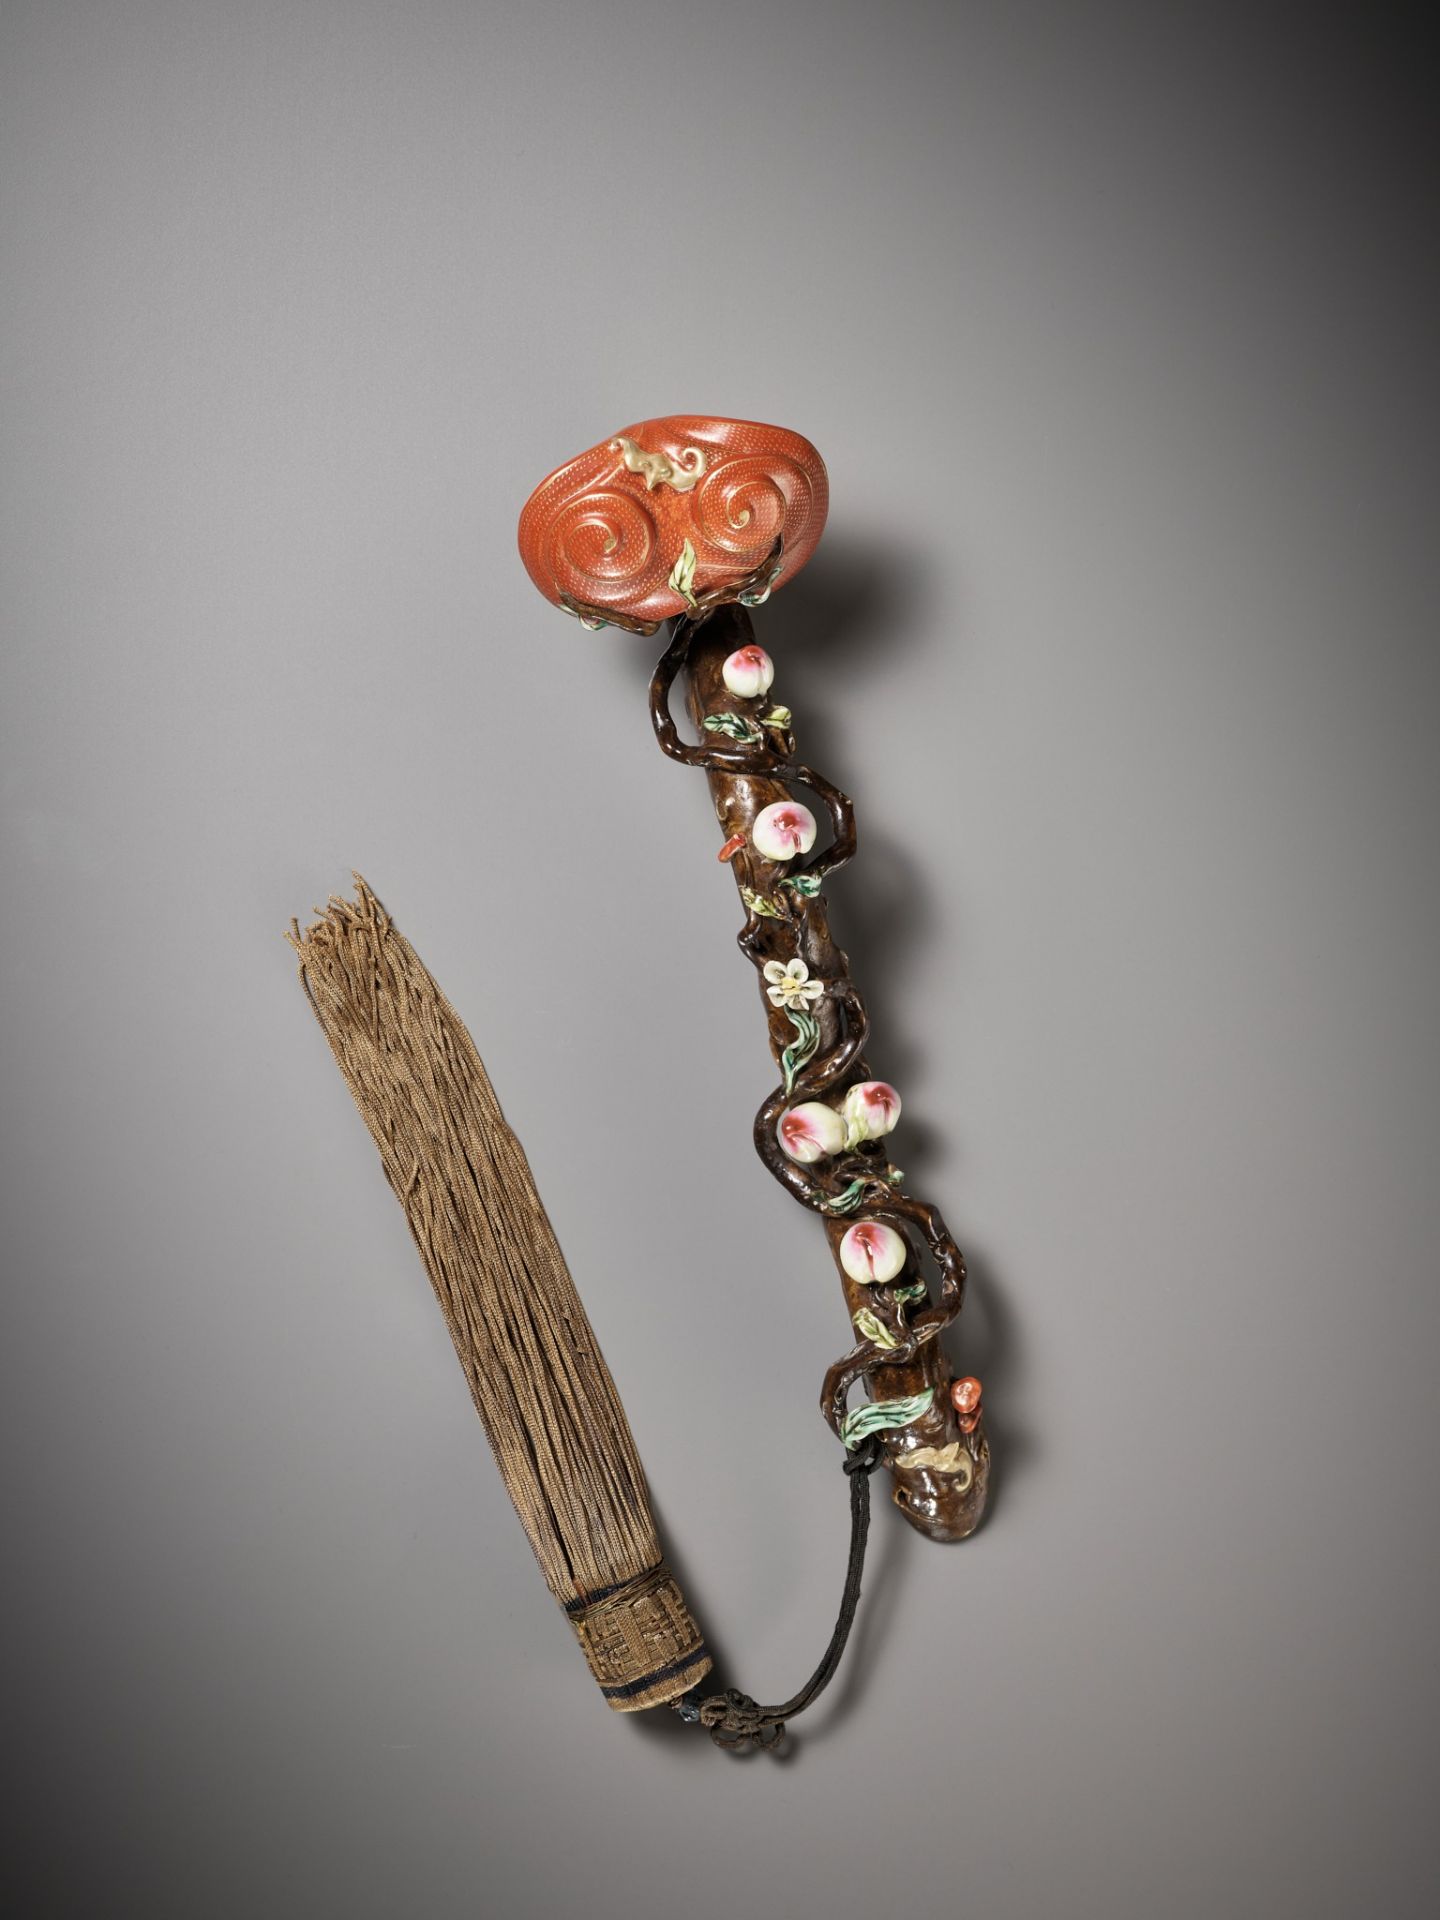 A FAMILLE ROSE PORCELAIN 'LINGZHI' RUYI SCEPTER, MID-QING DYNASTY - Image 6 of 12